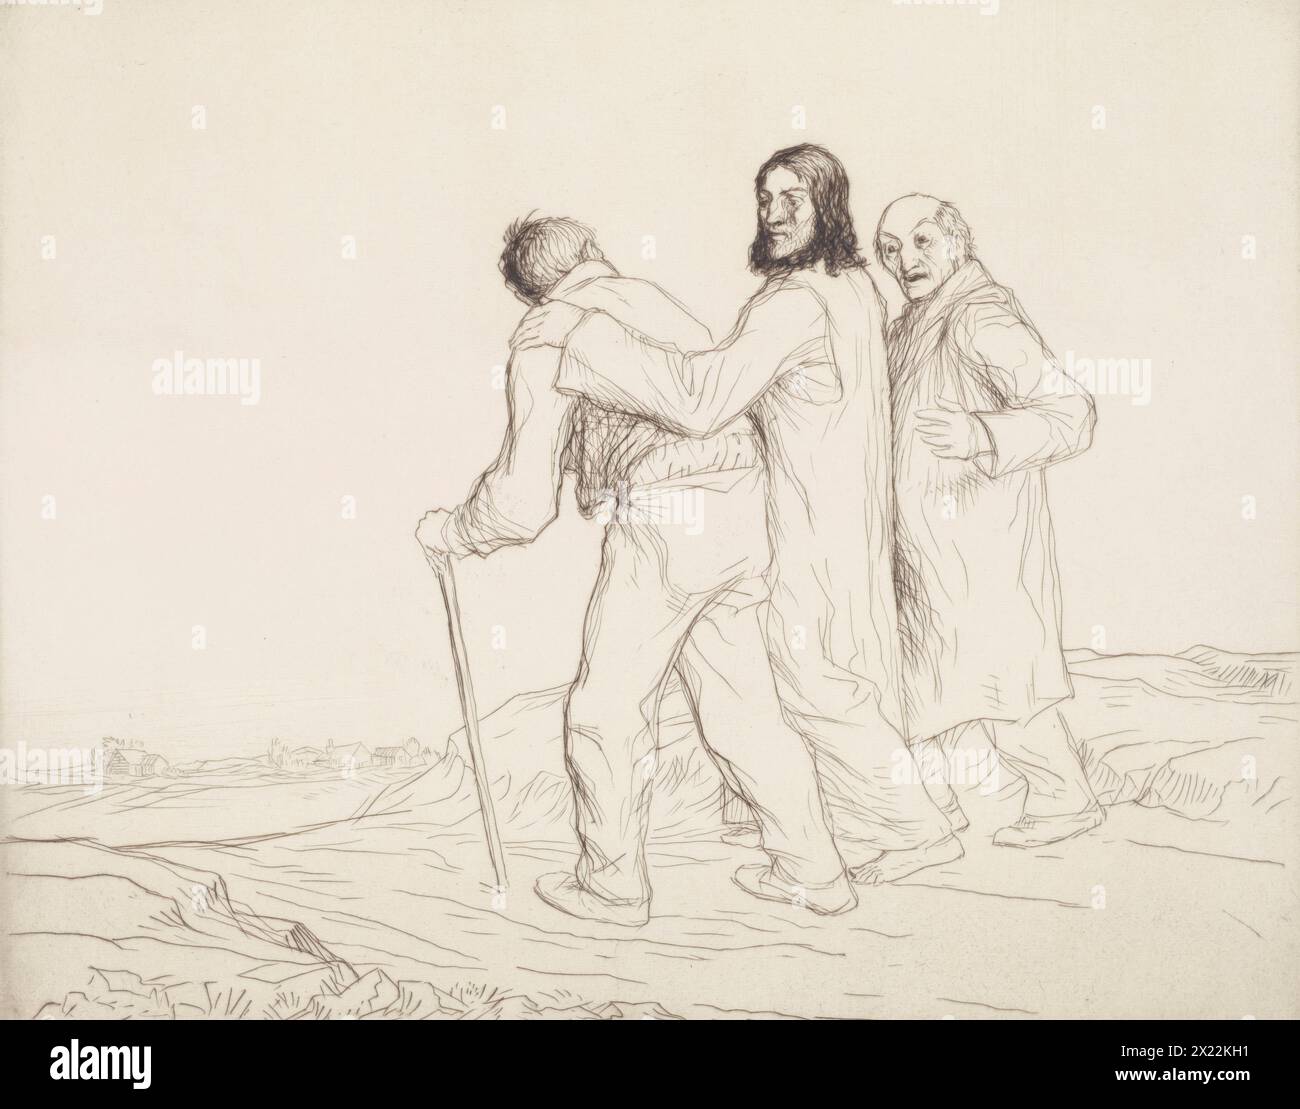 The way to Emmaus, no.2, 1914. In this scene, the resurrected Christ has found two disciples on the road to Emmaus who are dressed like working-class contemporaries of Strang. A disguised Christ interacts with them and they convince him to travel with them, all the while discussing with sadness the recent event of his death. The road is minimally described, and there is nothing in the distance apart from a few houses on the left. The message of Christ's humanity, surely consistent with Strang's socialist sympathies, is what ultimately counts. Stock Photo